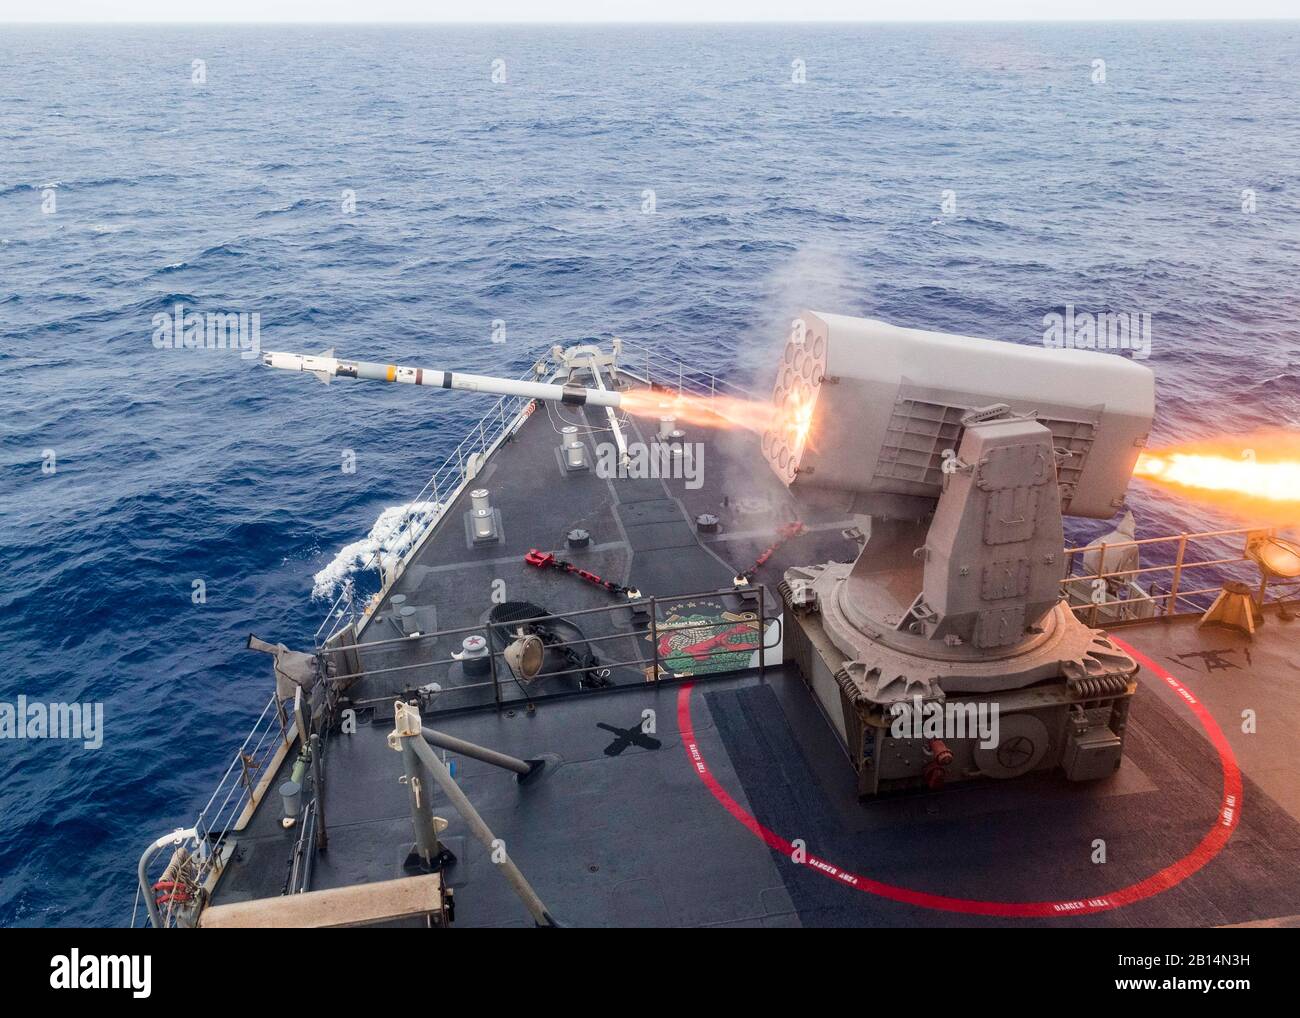 The amphibious dock landing ship USS Ashland (LSD 48) launches a Rolling Airframe Missile (RAM) during a missile exercise (MSLEX) in the Pacific Ocean, March 16, 2019. MSLEXs are designed to increase the tactical proficiency, lethality, and interoperability of participating warships in an era of great power competition. (U.S. Navy photo by Mass Communication Specialist 2nd Class Markus Castaneda) Stock Photo